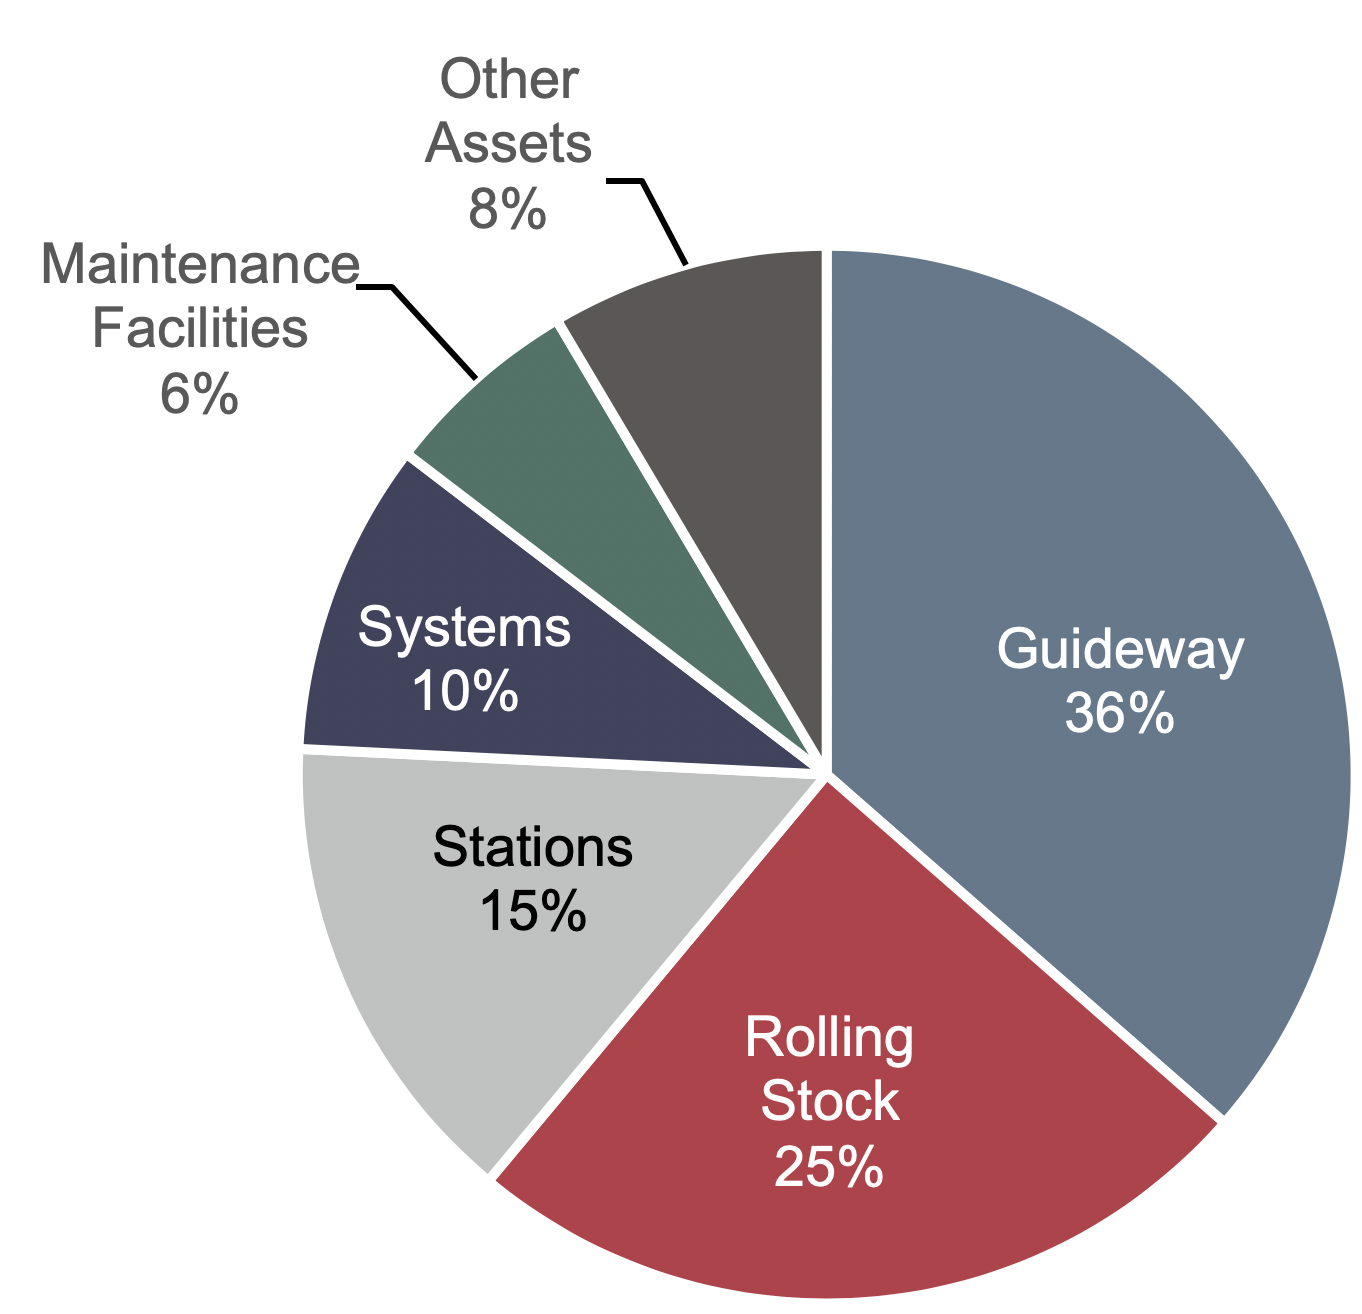 A pie chart shows uses of capital (in percent) for 6 asset categories as follows: guideway (36 percent), rolling stock (25 percent), stations (15 percent), systems (10 percent), maintenance facilities (6 percent), and other assets (8 percent). Source: National Transit Database.